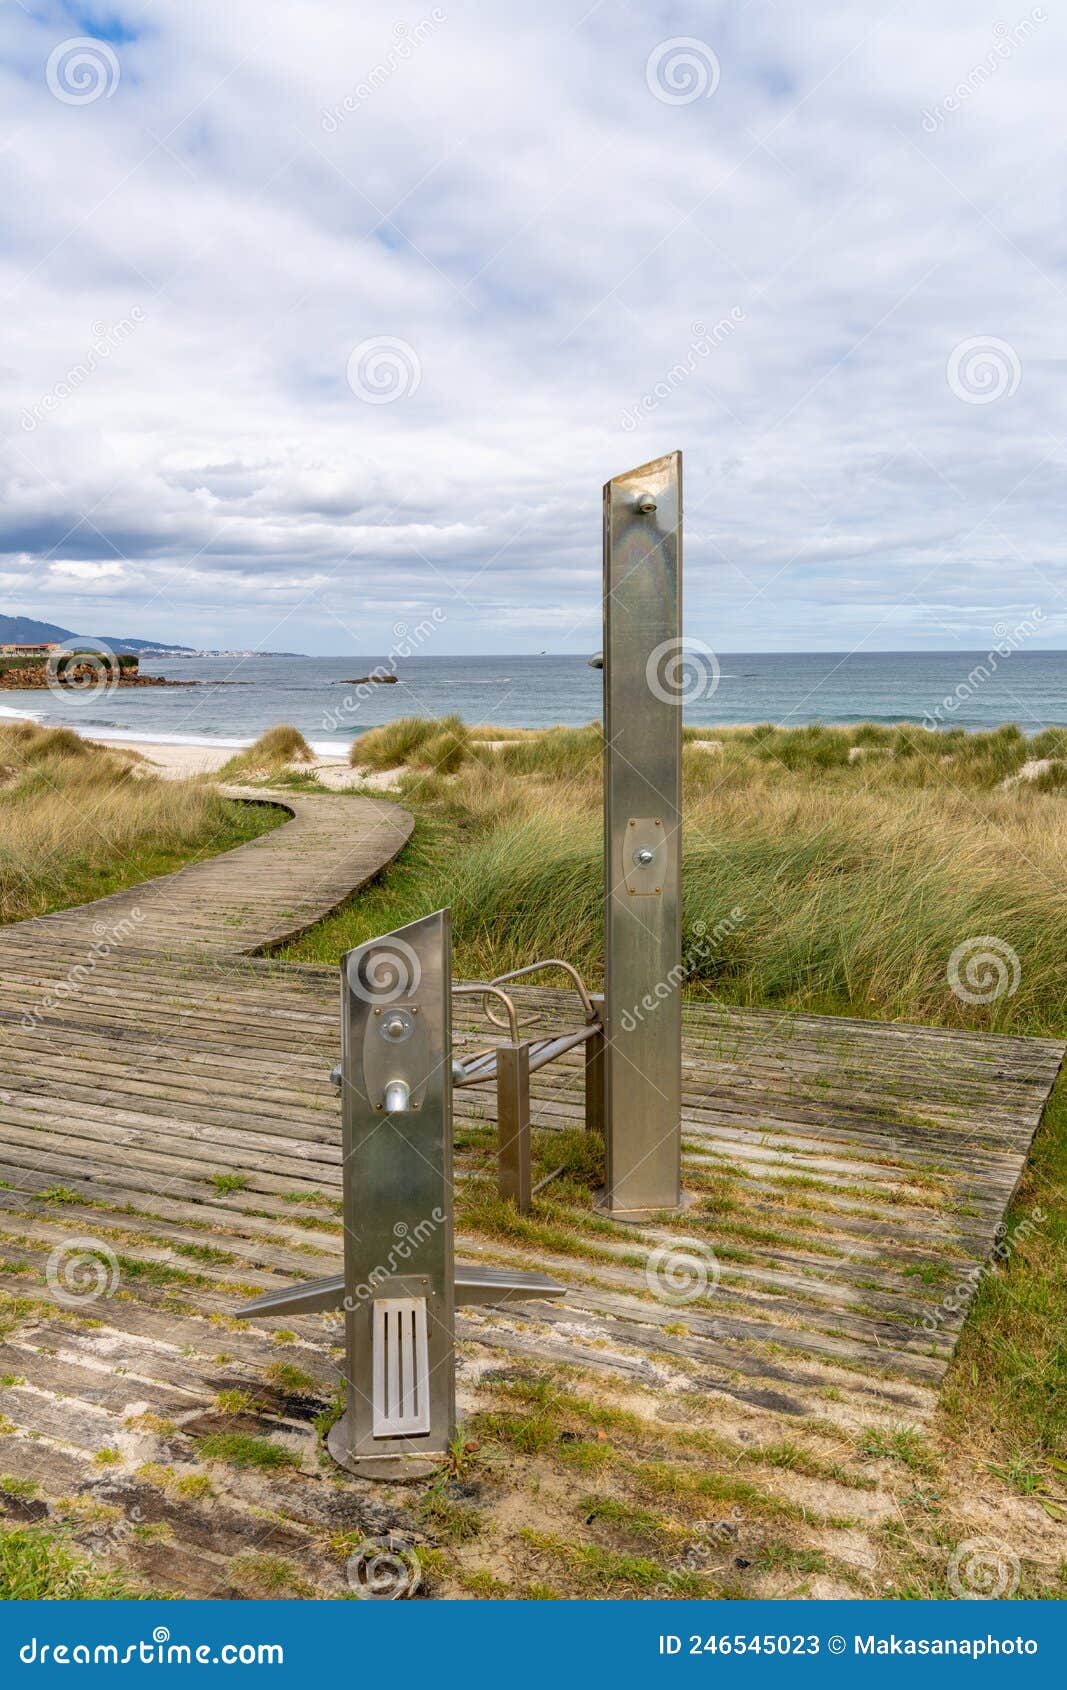 beach access with shower and wooden boardwalk on the coast of galicia